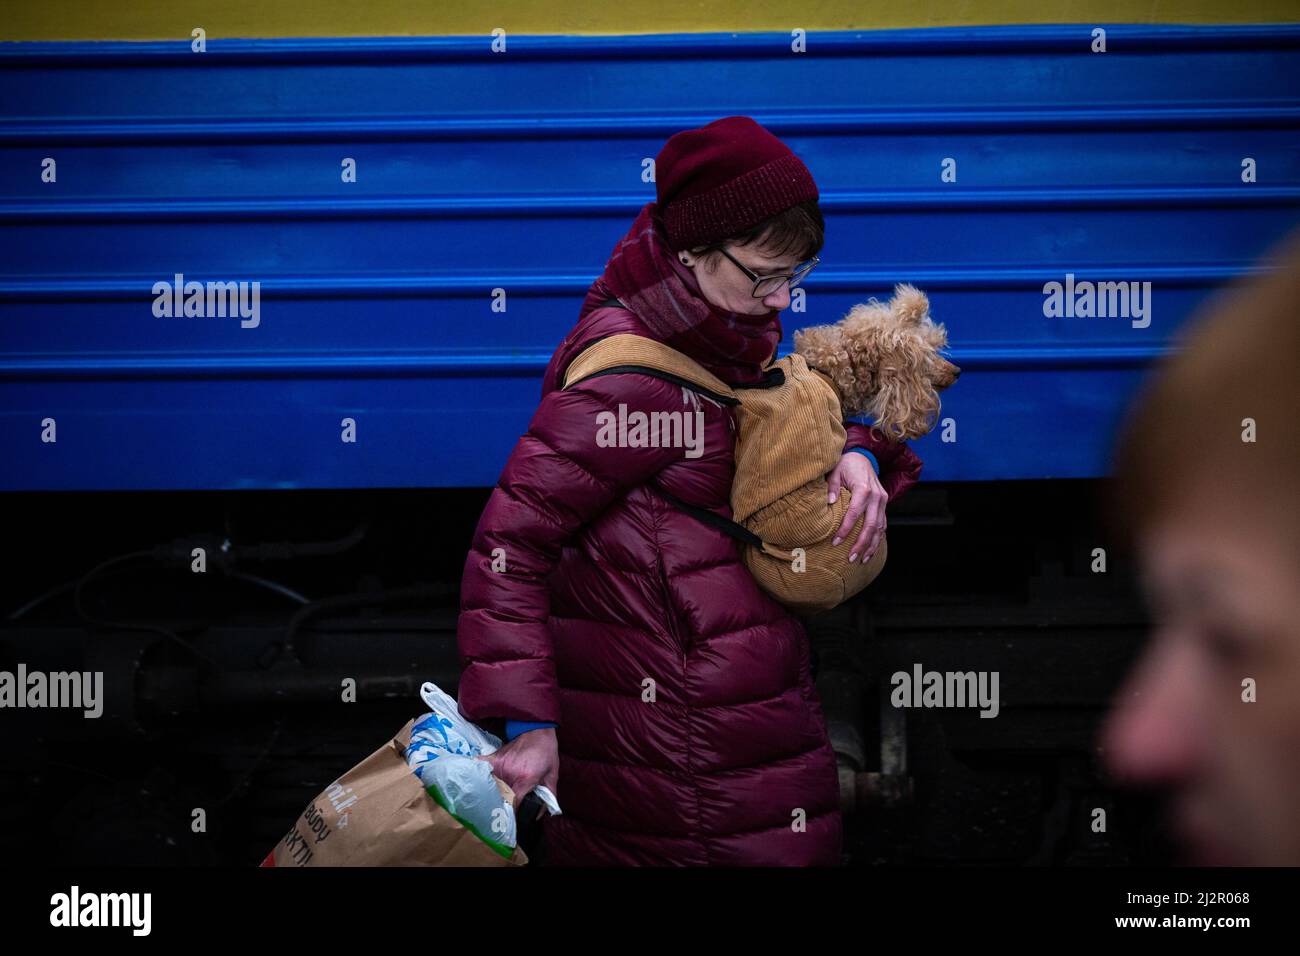 LVIV, UKRAINE - APR 02, 2022: Humanitarian catastrophe during at war in Ukraine. Refugees with a pet small poodle dog from Mariupol are flees to Europ Stock Photo